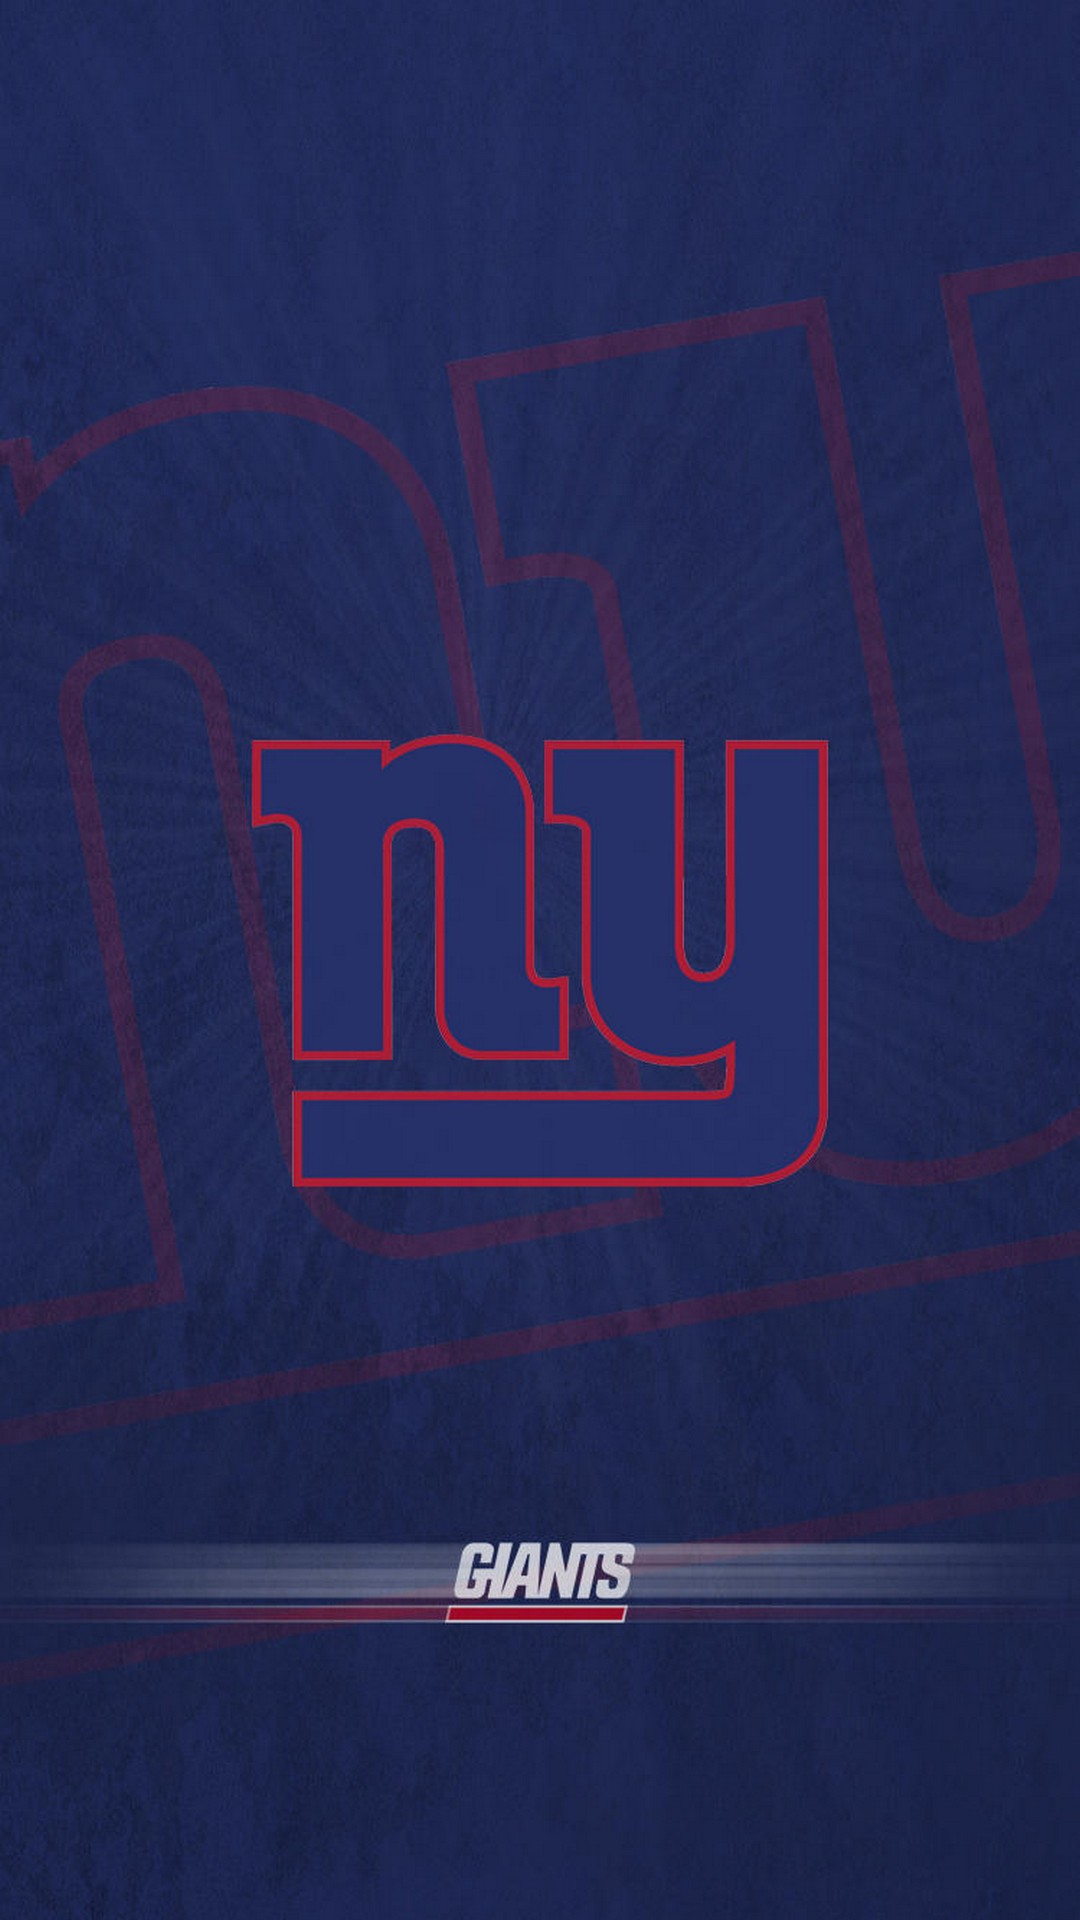 New York Giants iPhone Wallpaper New with high-resolution 1080x1920 pixel. Donwload and set as wallpaper for your iPhone X, iPhone XS home screen backgrounds, XS Max, XR, iPhone8 lock screen wallpaper, iPhone 7, 6, SE and other mobile devices